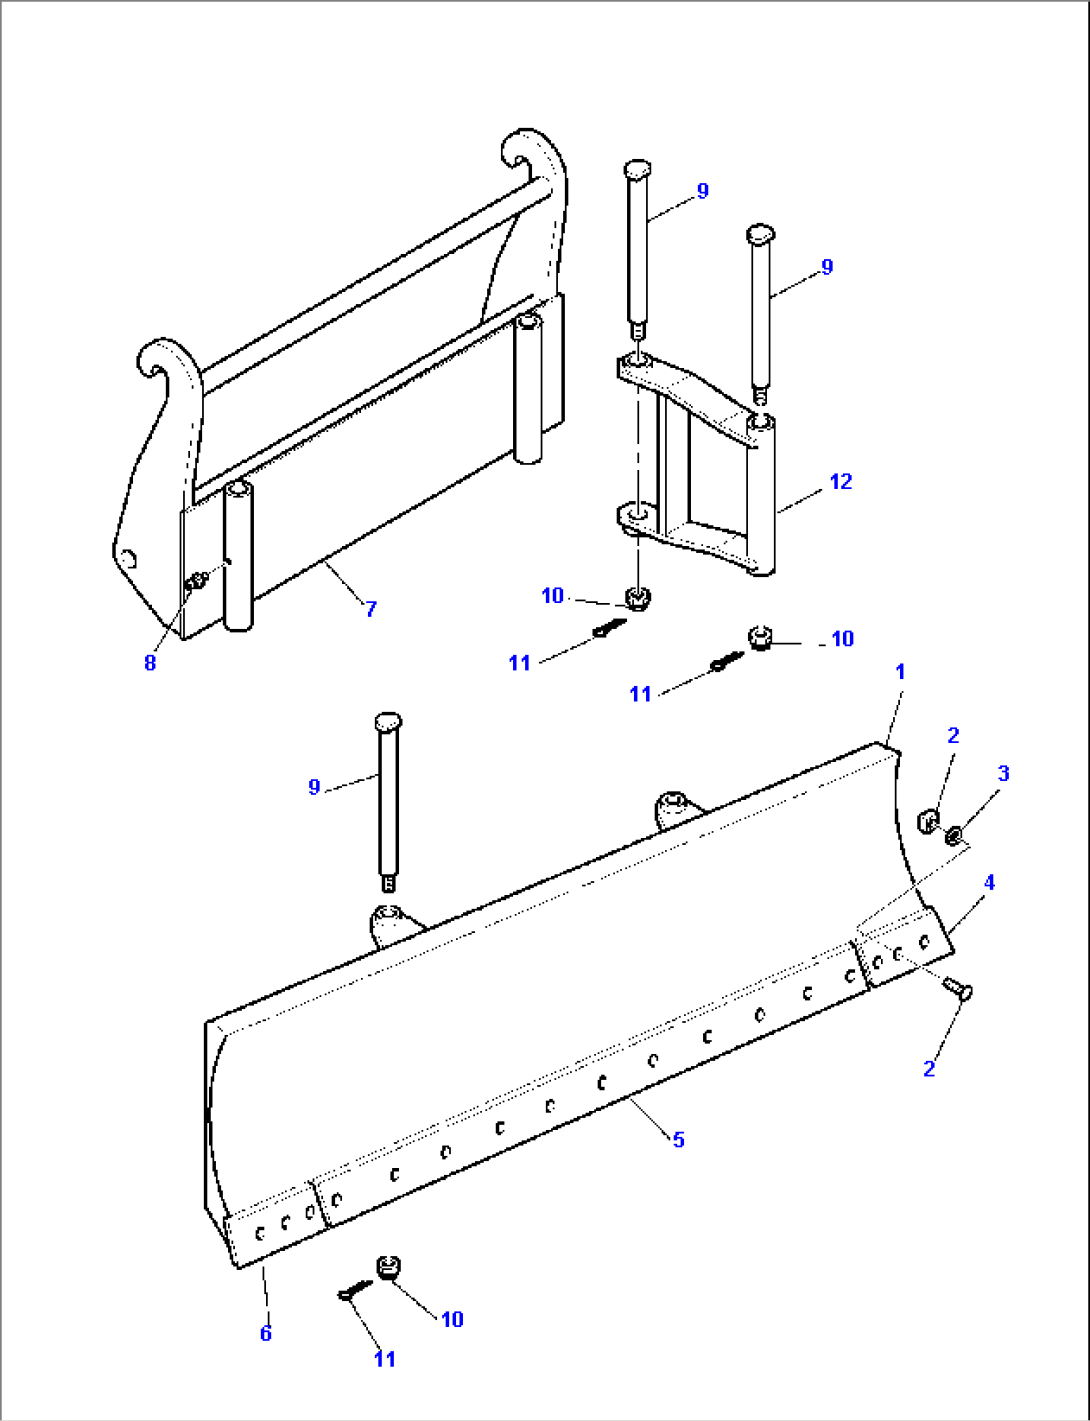 BLADE (WITH HYDRAULIC QUICK COUPLING) (1/2)